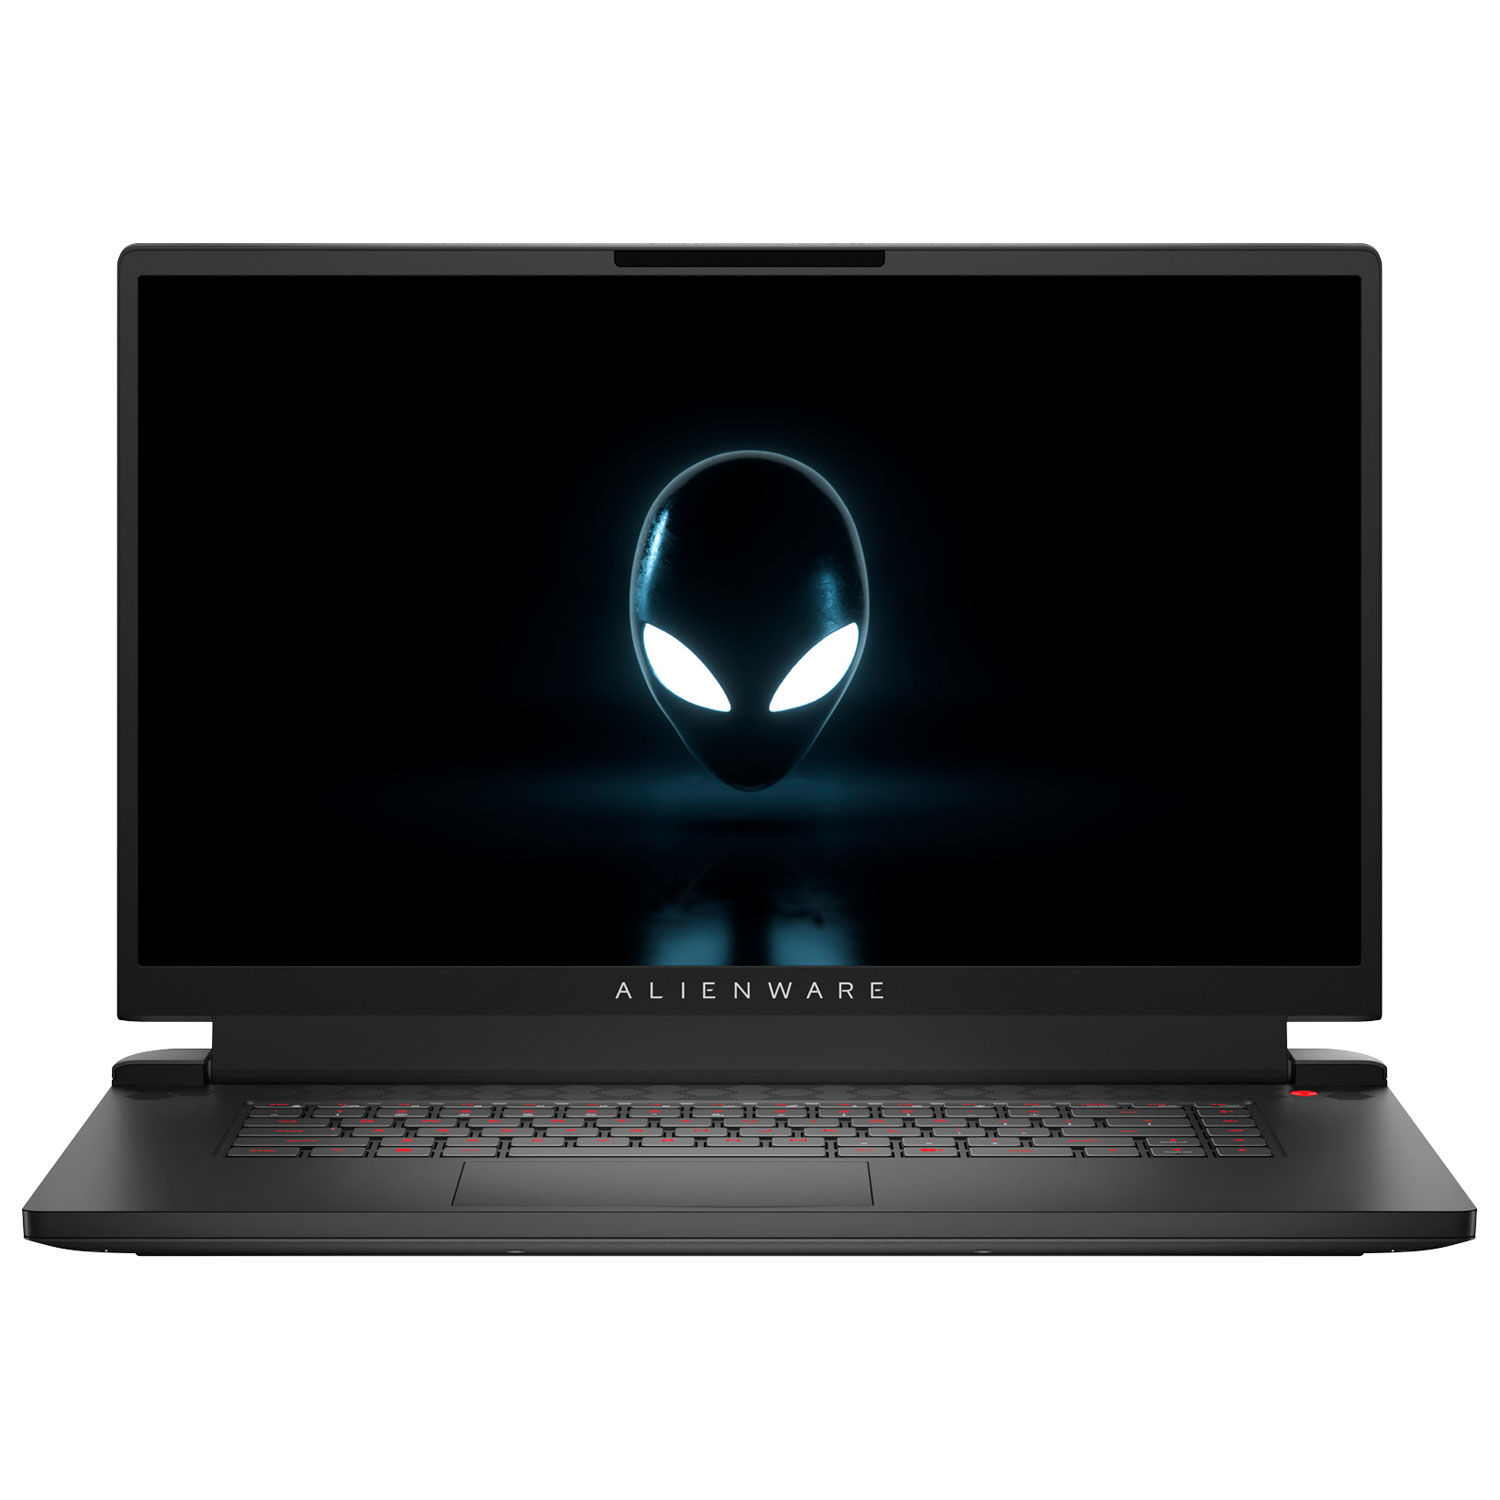 Alienware M16 - Where to Buy it at the Best Price in Canada?